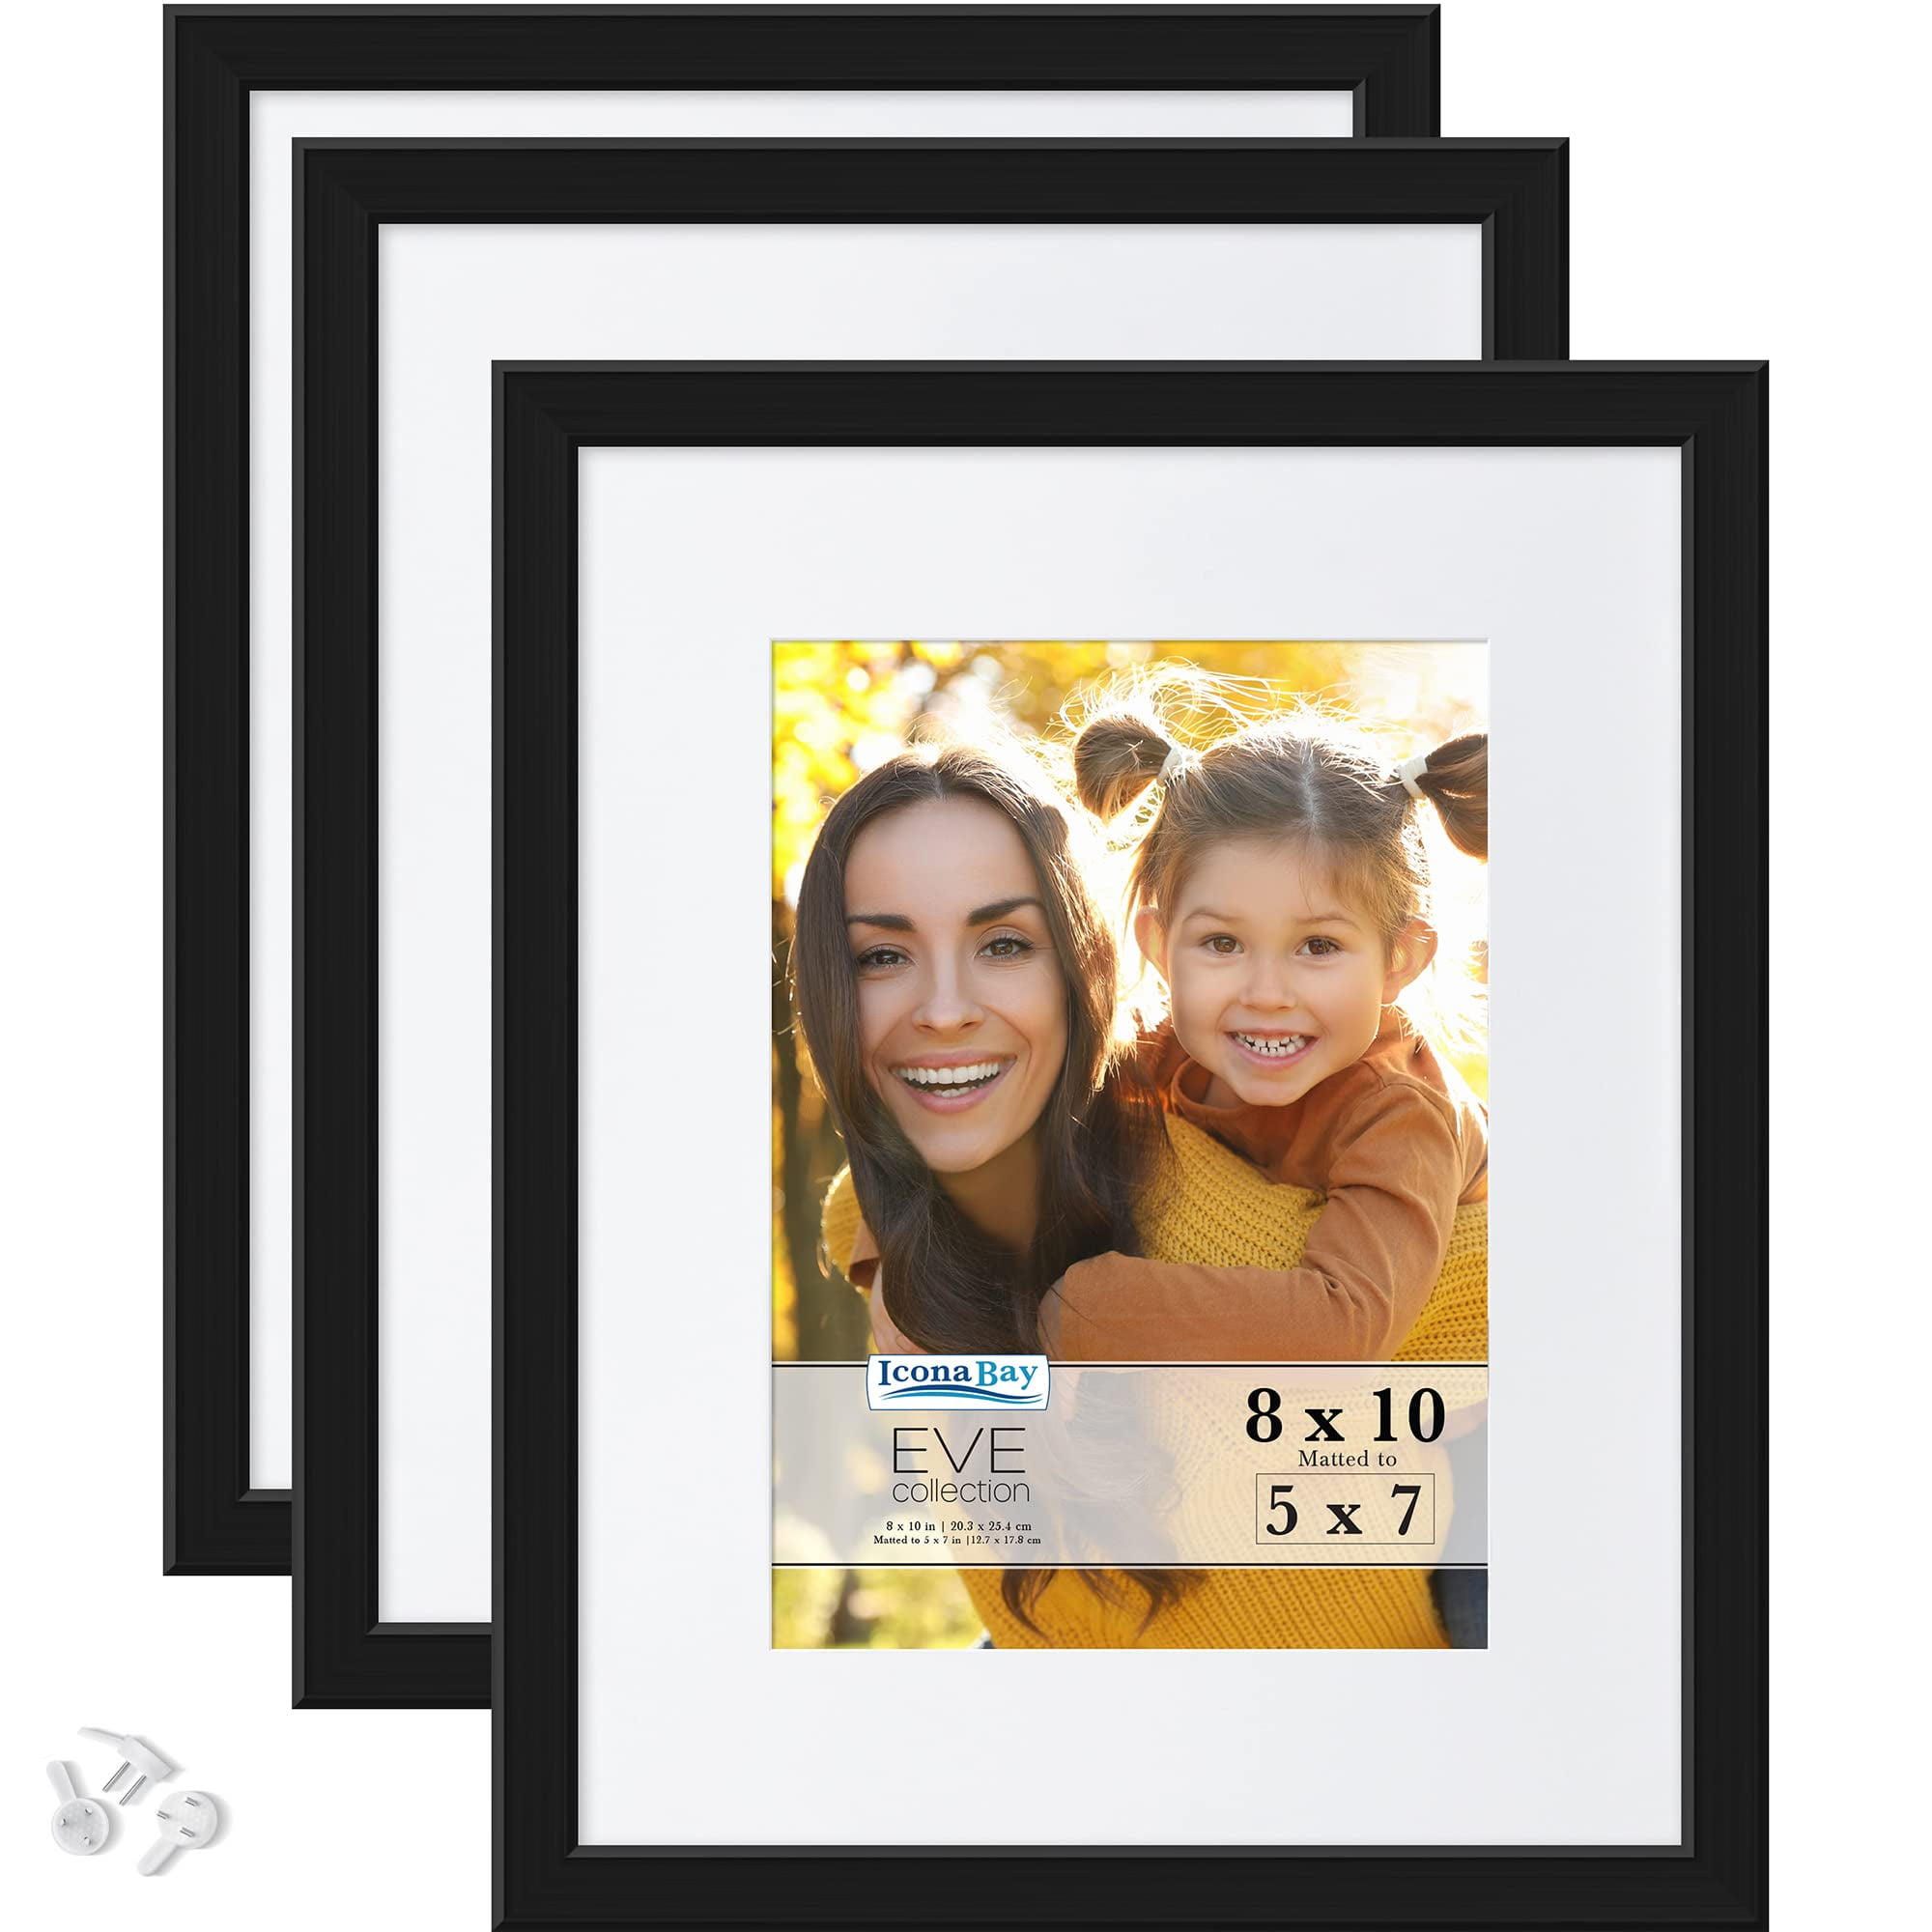 Available 5 5x7 Oak Hang or Sit Picture Frames Glass & Cardboard Back Medium 